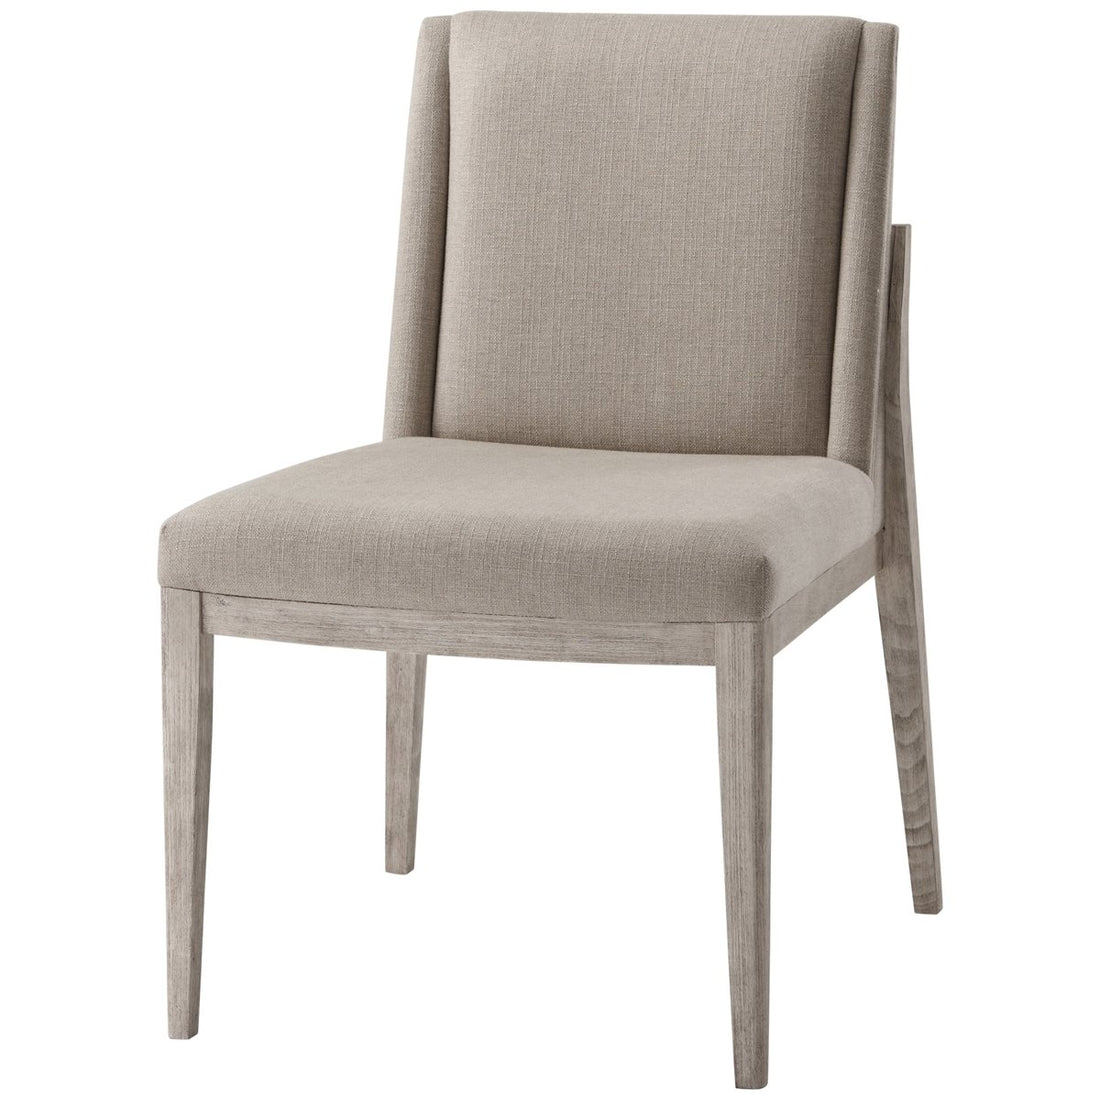 Theodore Alexander Isola Valeria Dining Side Chair, Set of 2